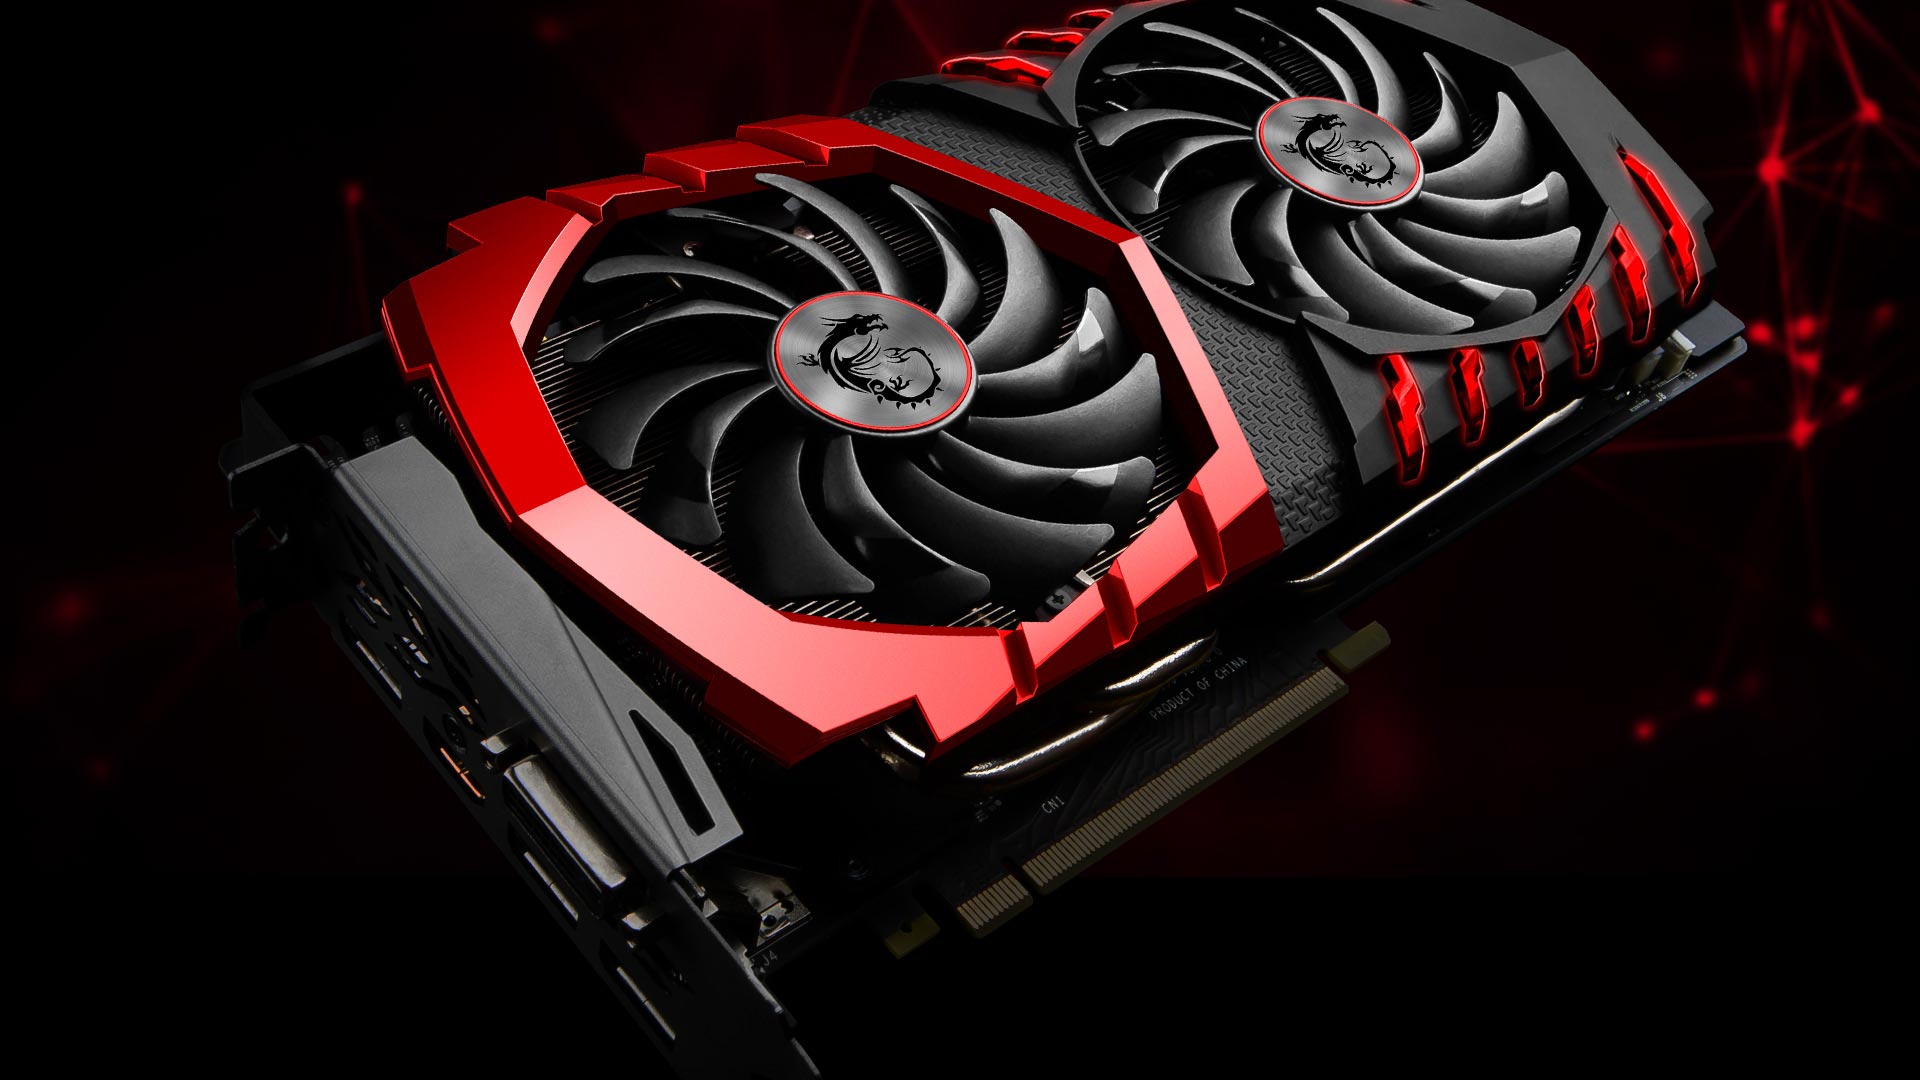 The 5 best graphics cards for gaming this year | Best Buy Blog